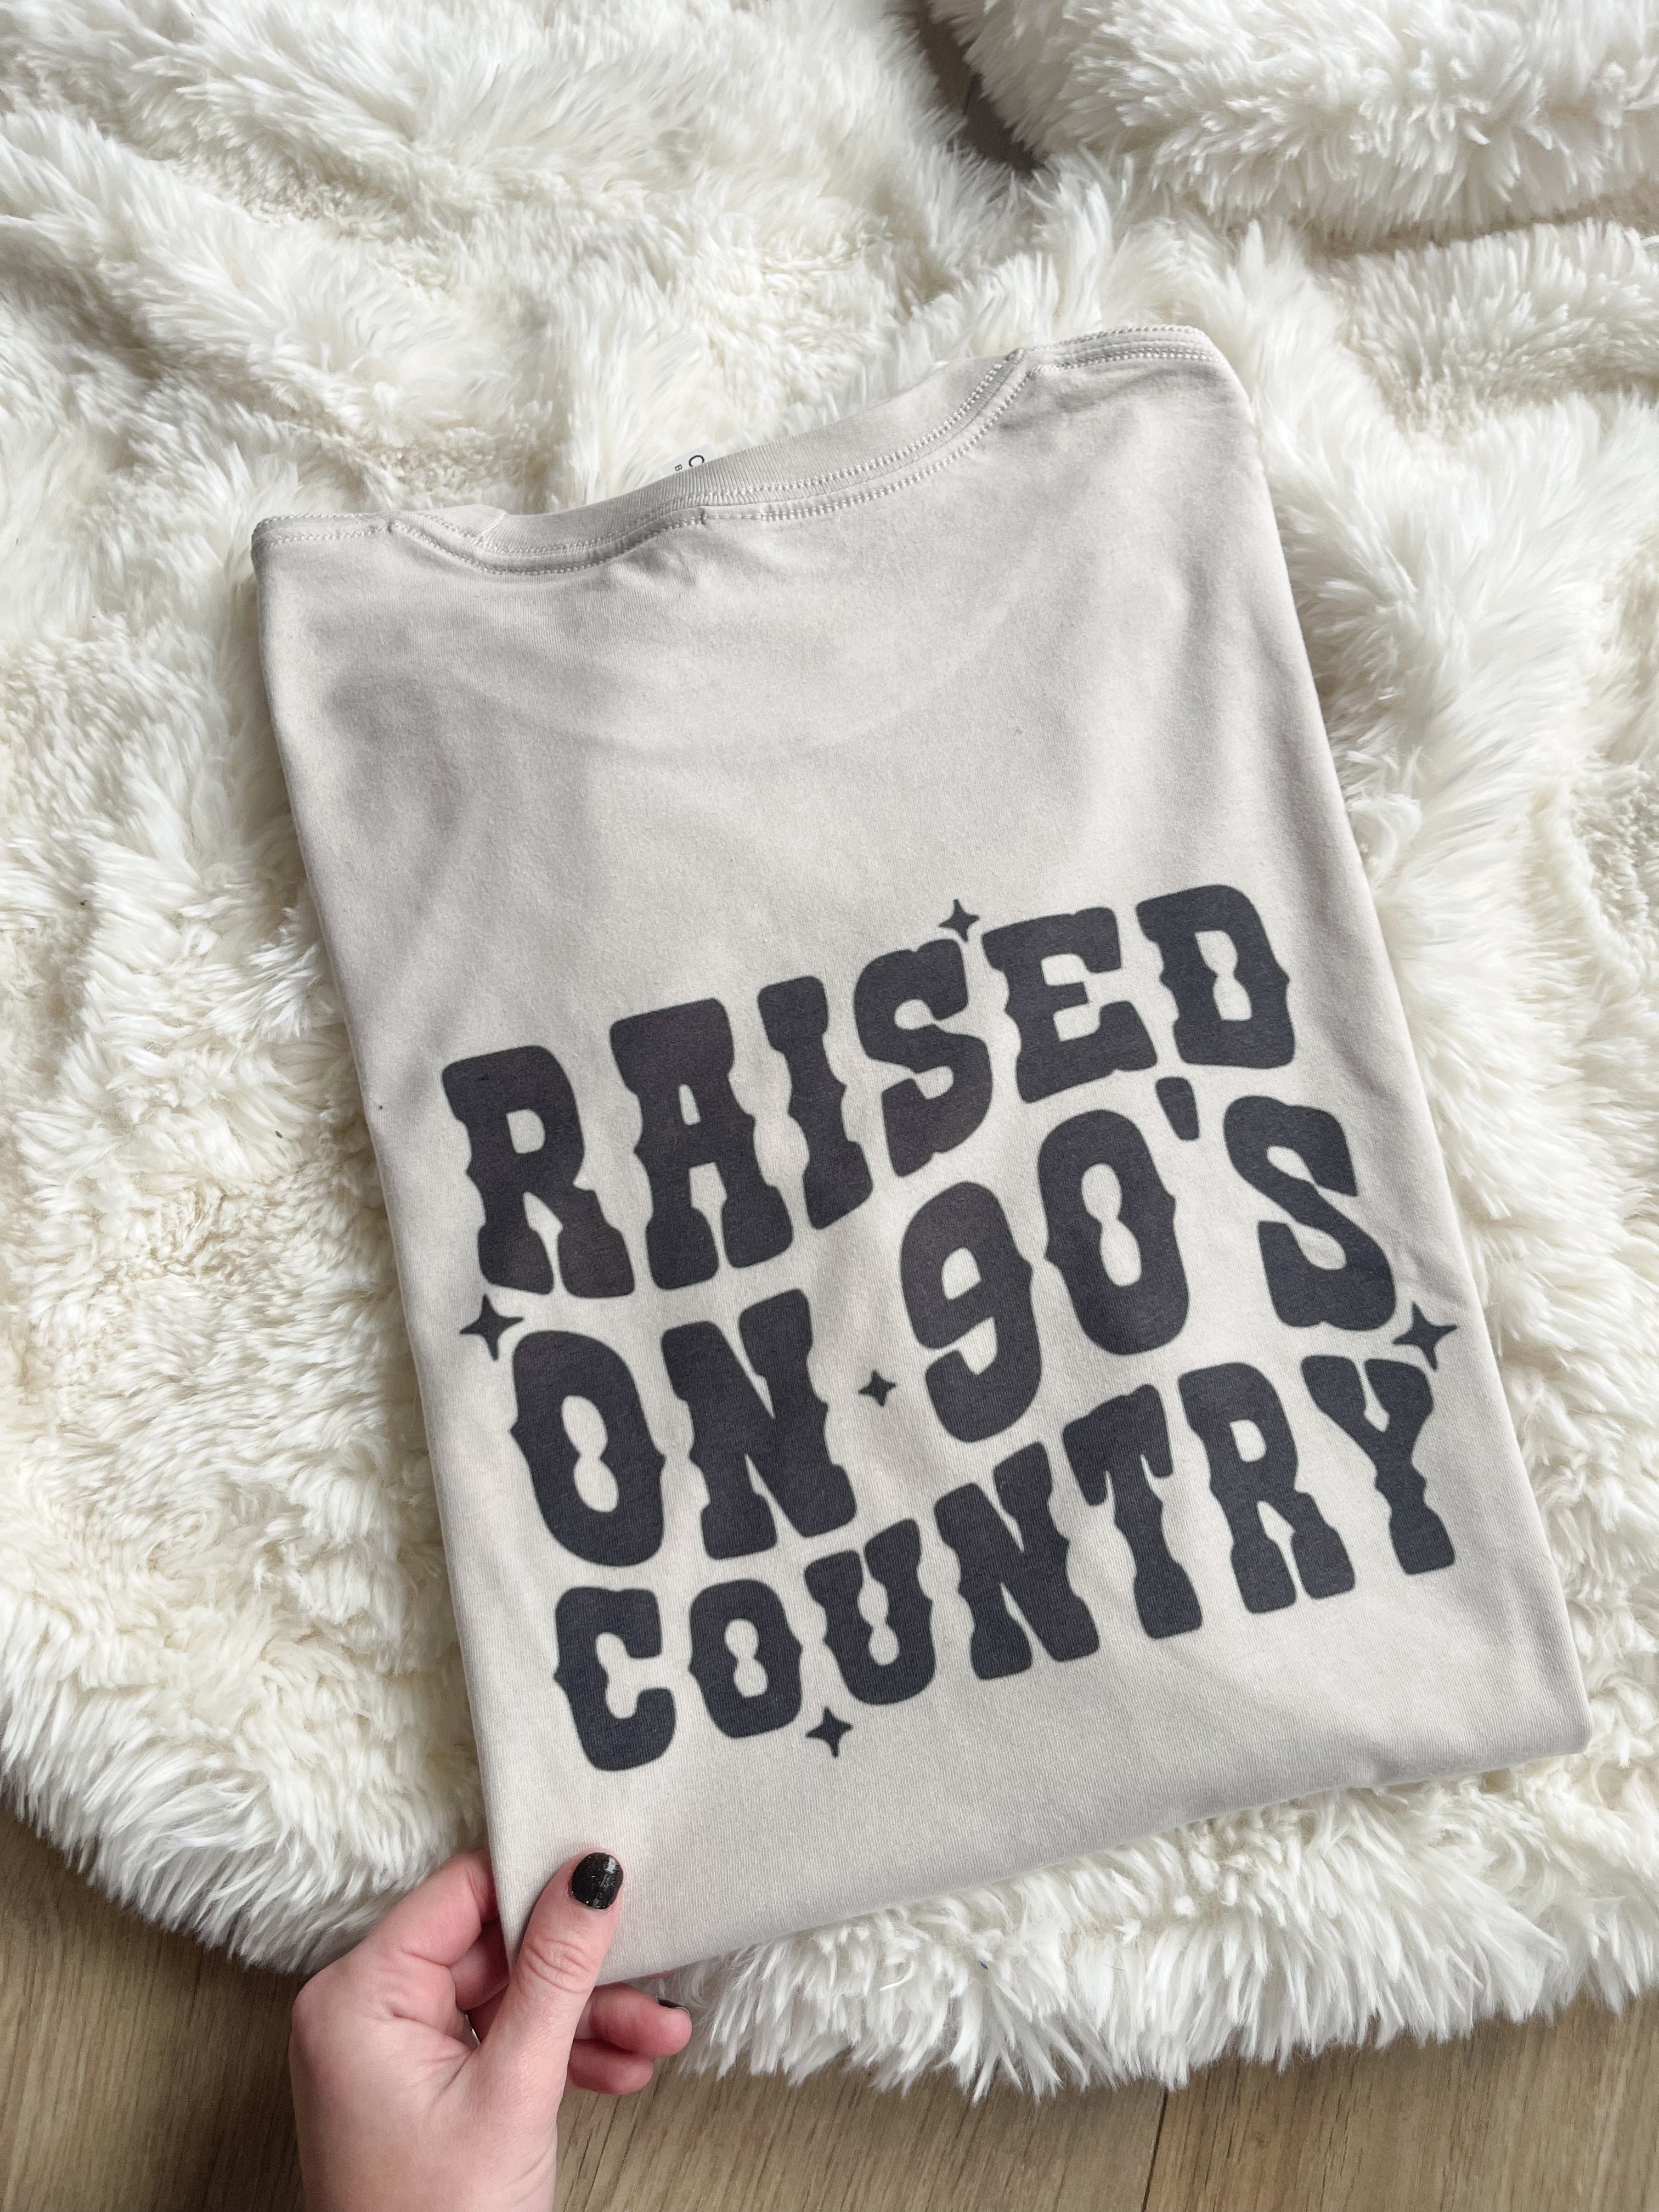 Raised On 90’s Country Tee